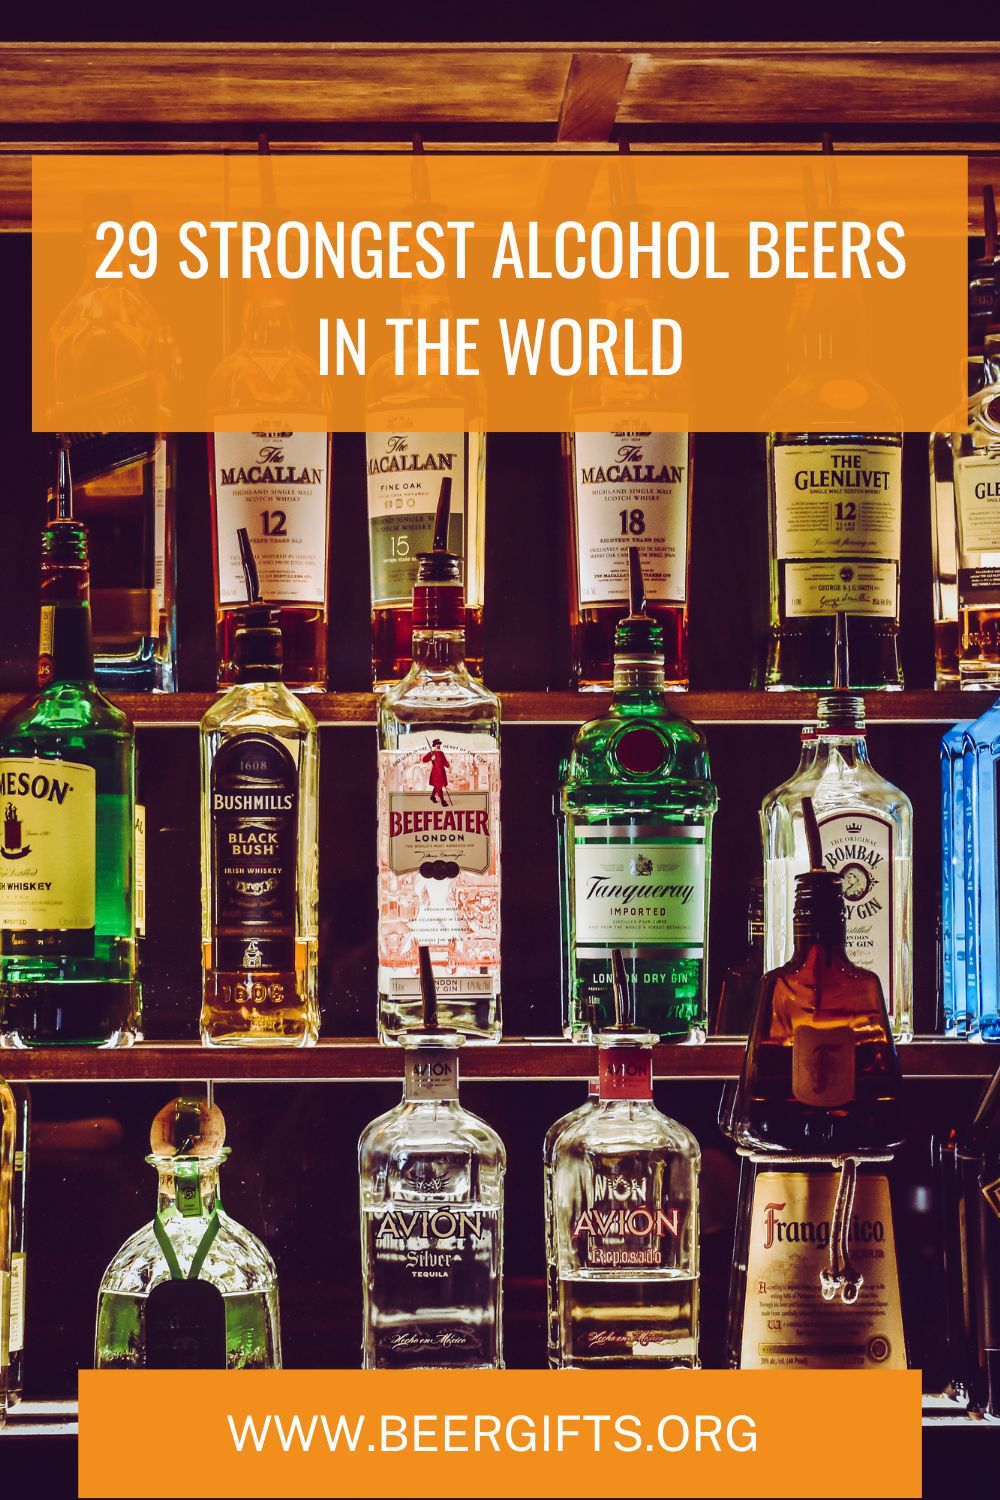 29 Strongest Alcohol Beers In the World31